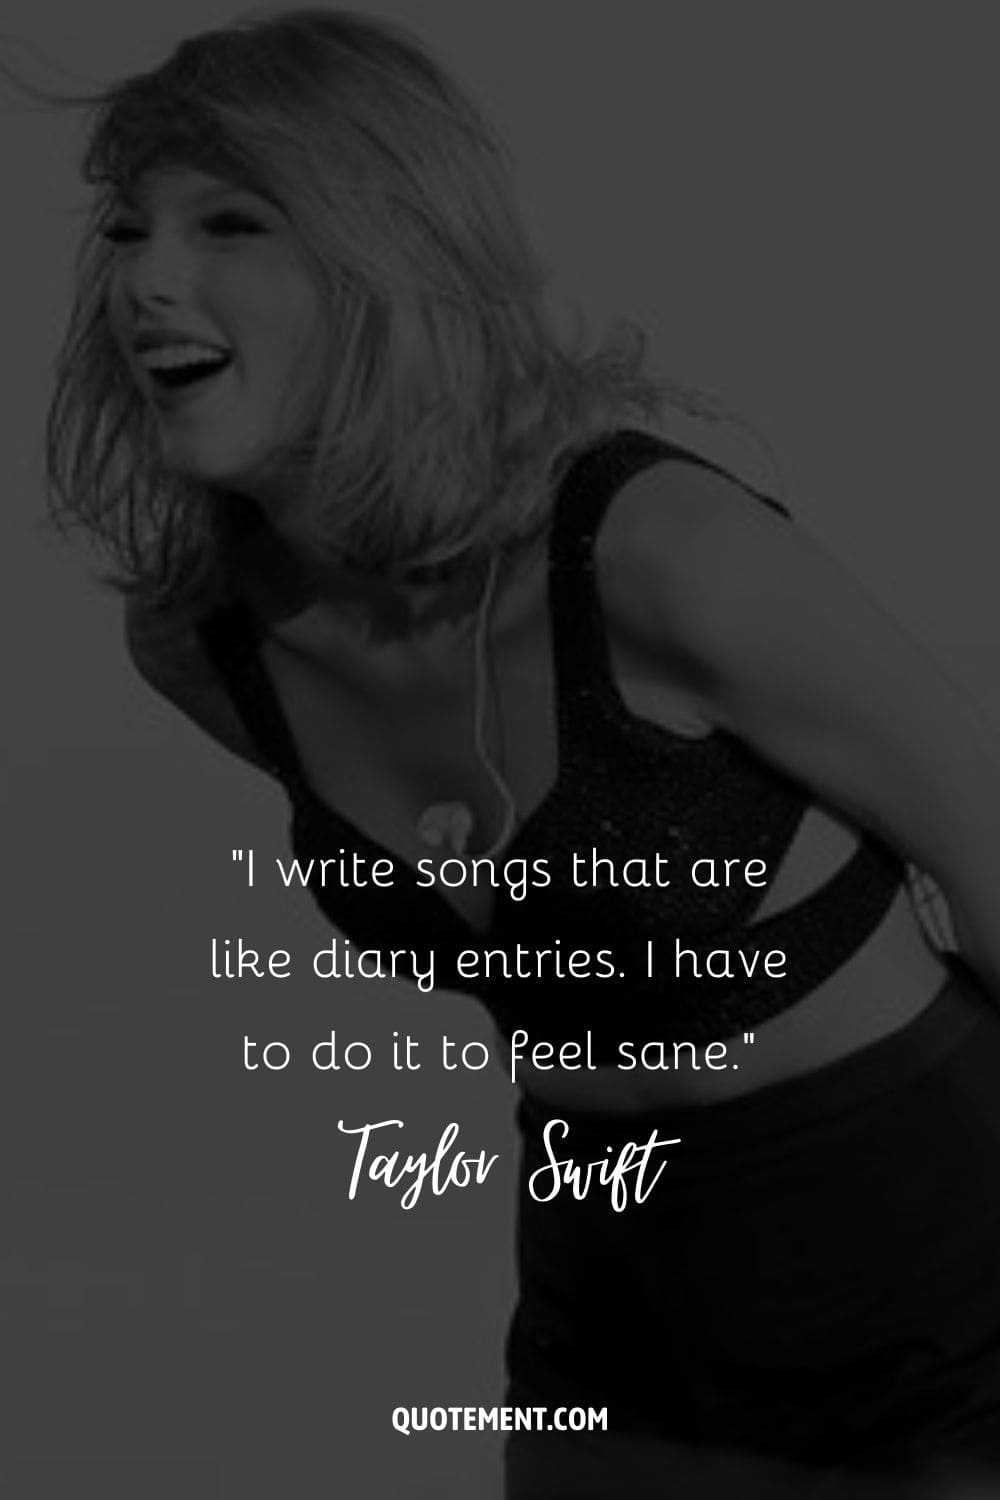 “I write songs that are like diary entries. I have to do it to feel sane.” ― Taylor Swift